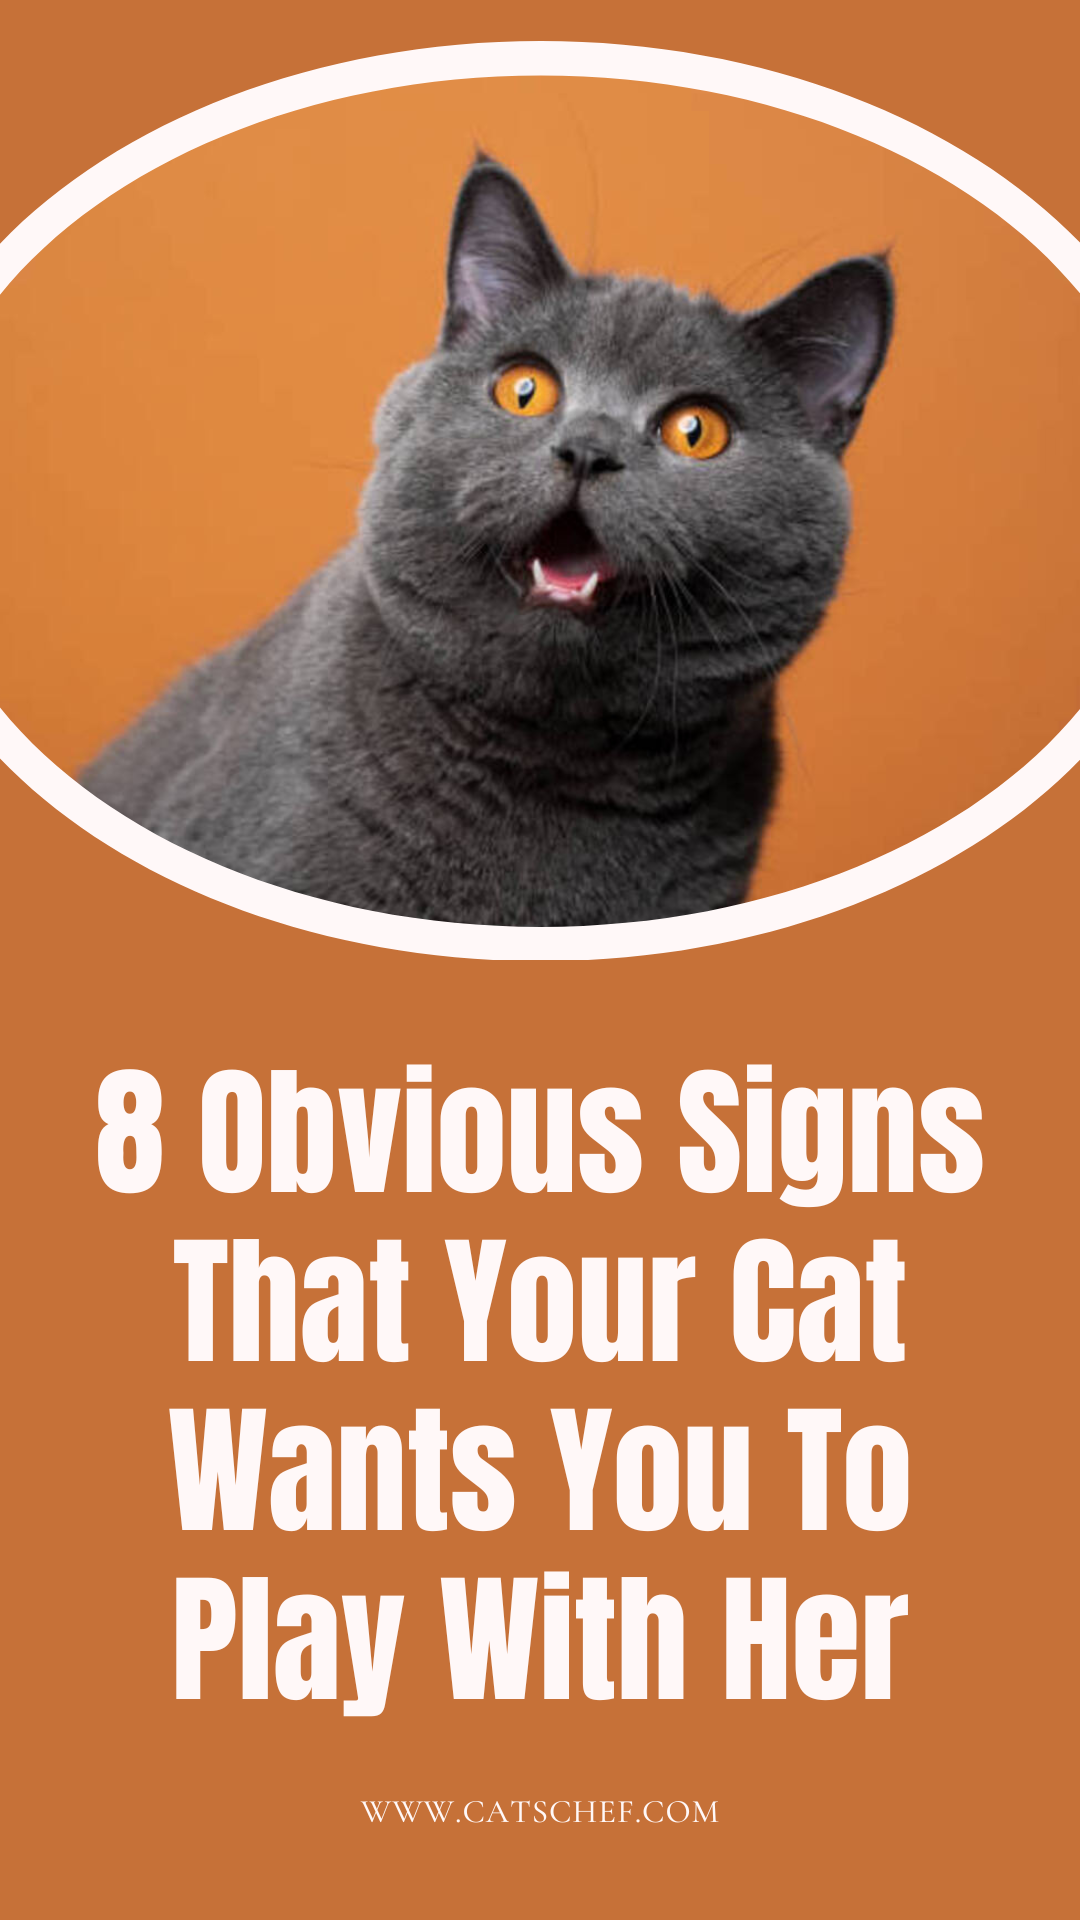 8 Obvious Signs That Your Cat Wants You To Play With Her